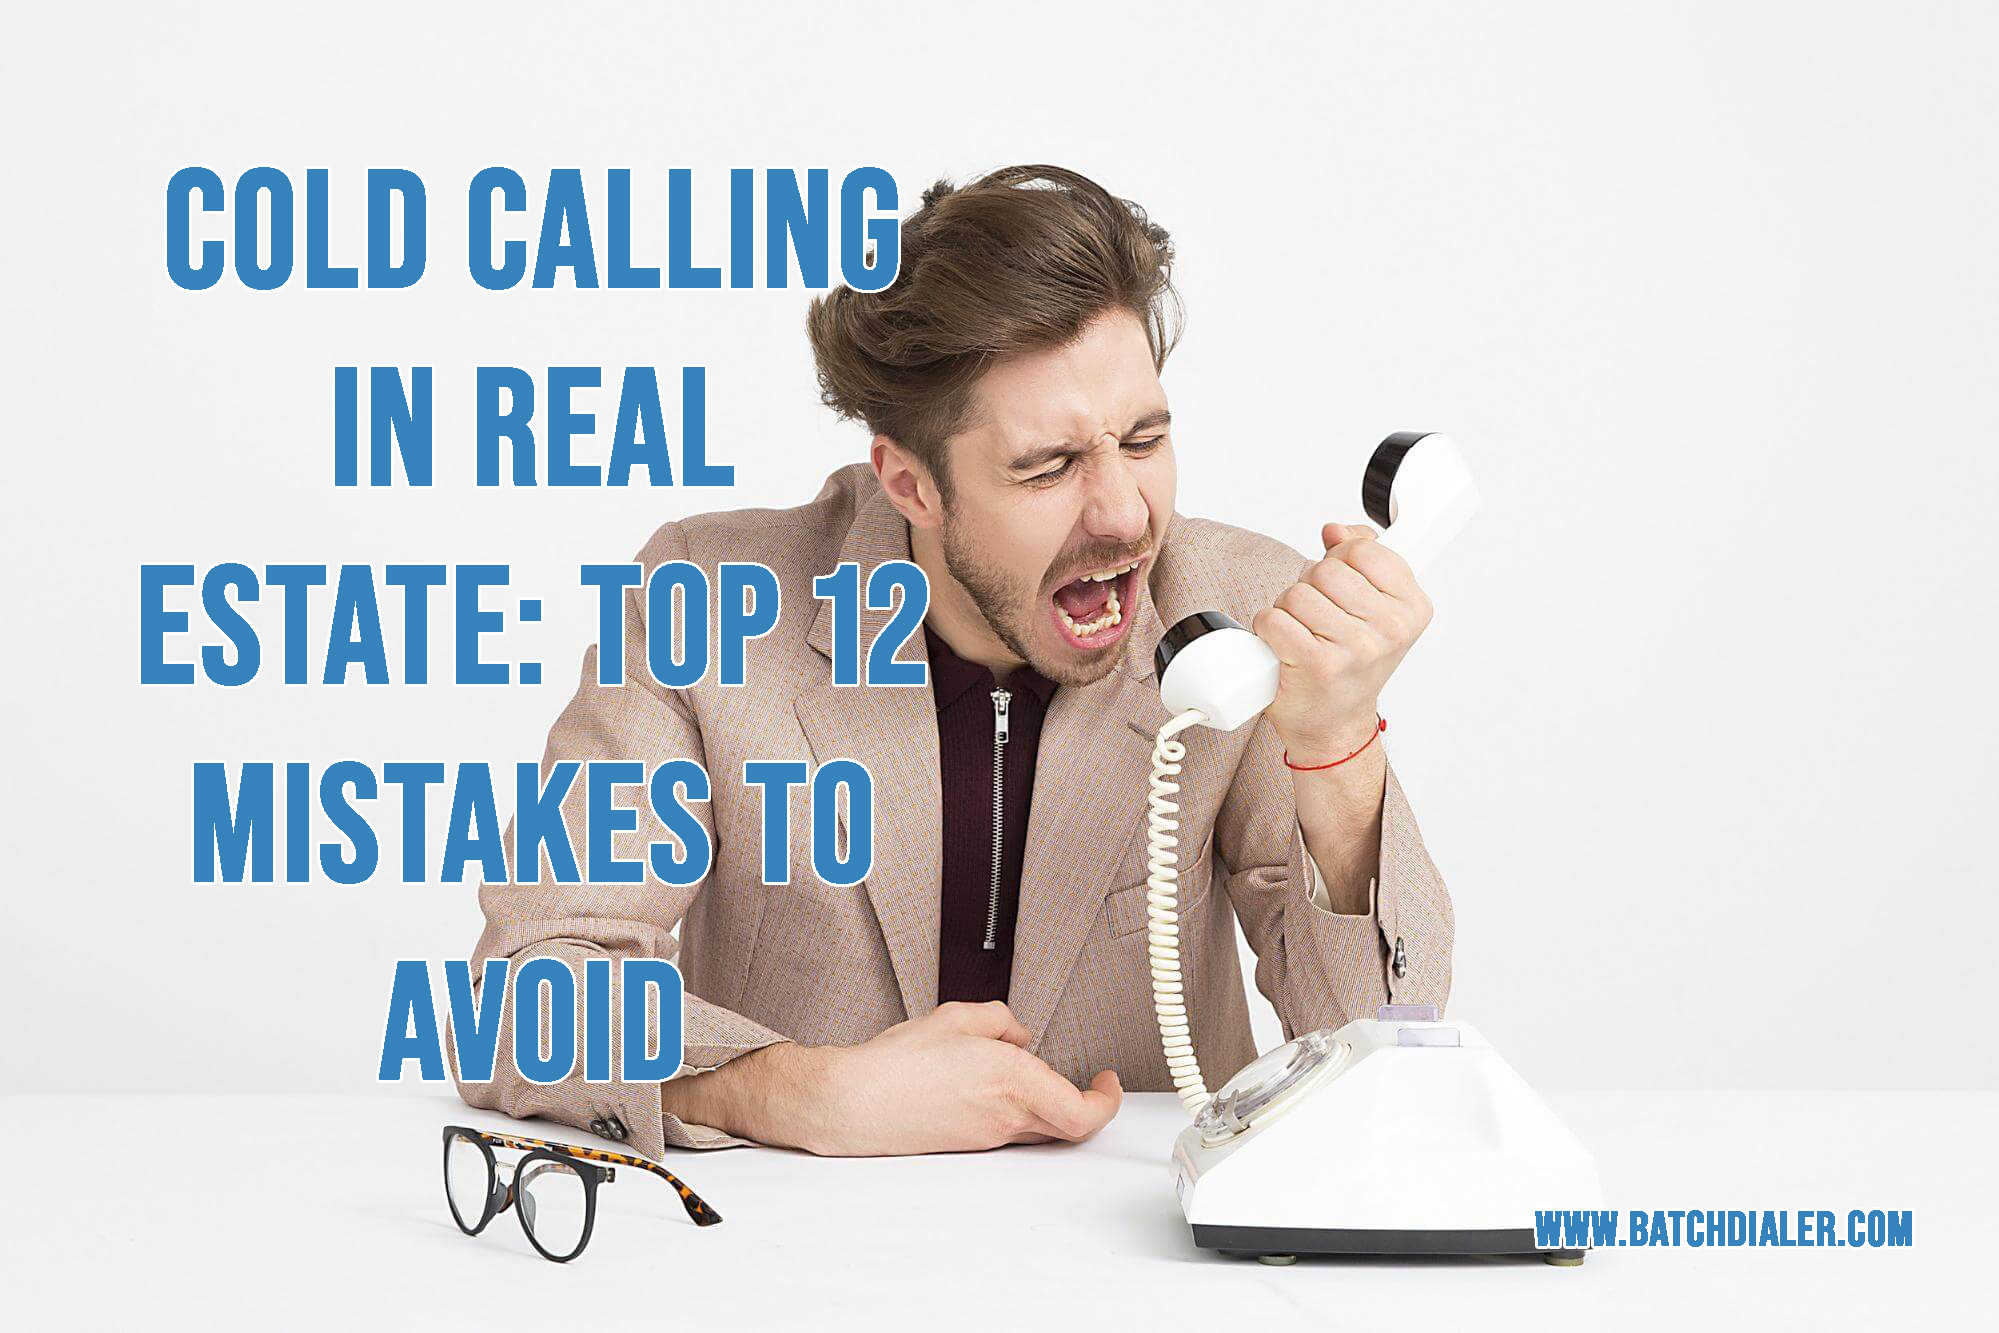 Cold Calling in Real Estate Top 12 Mistakes To Avoid